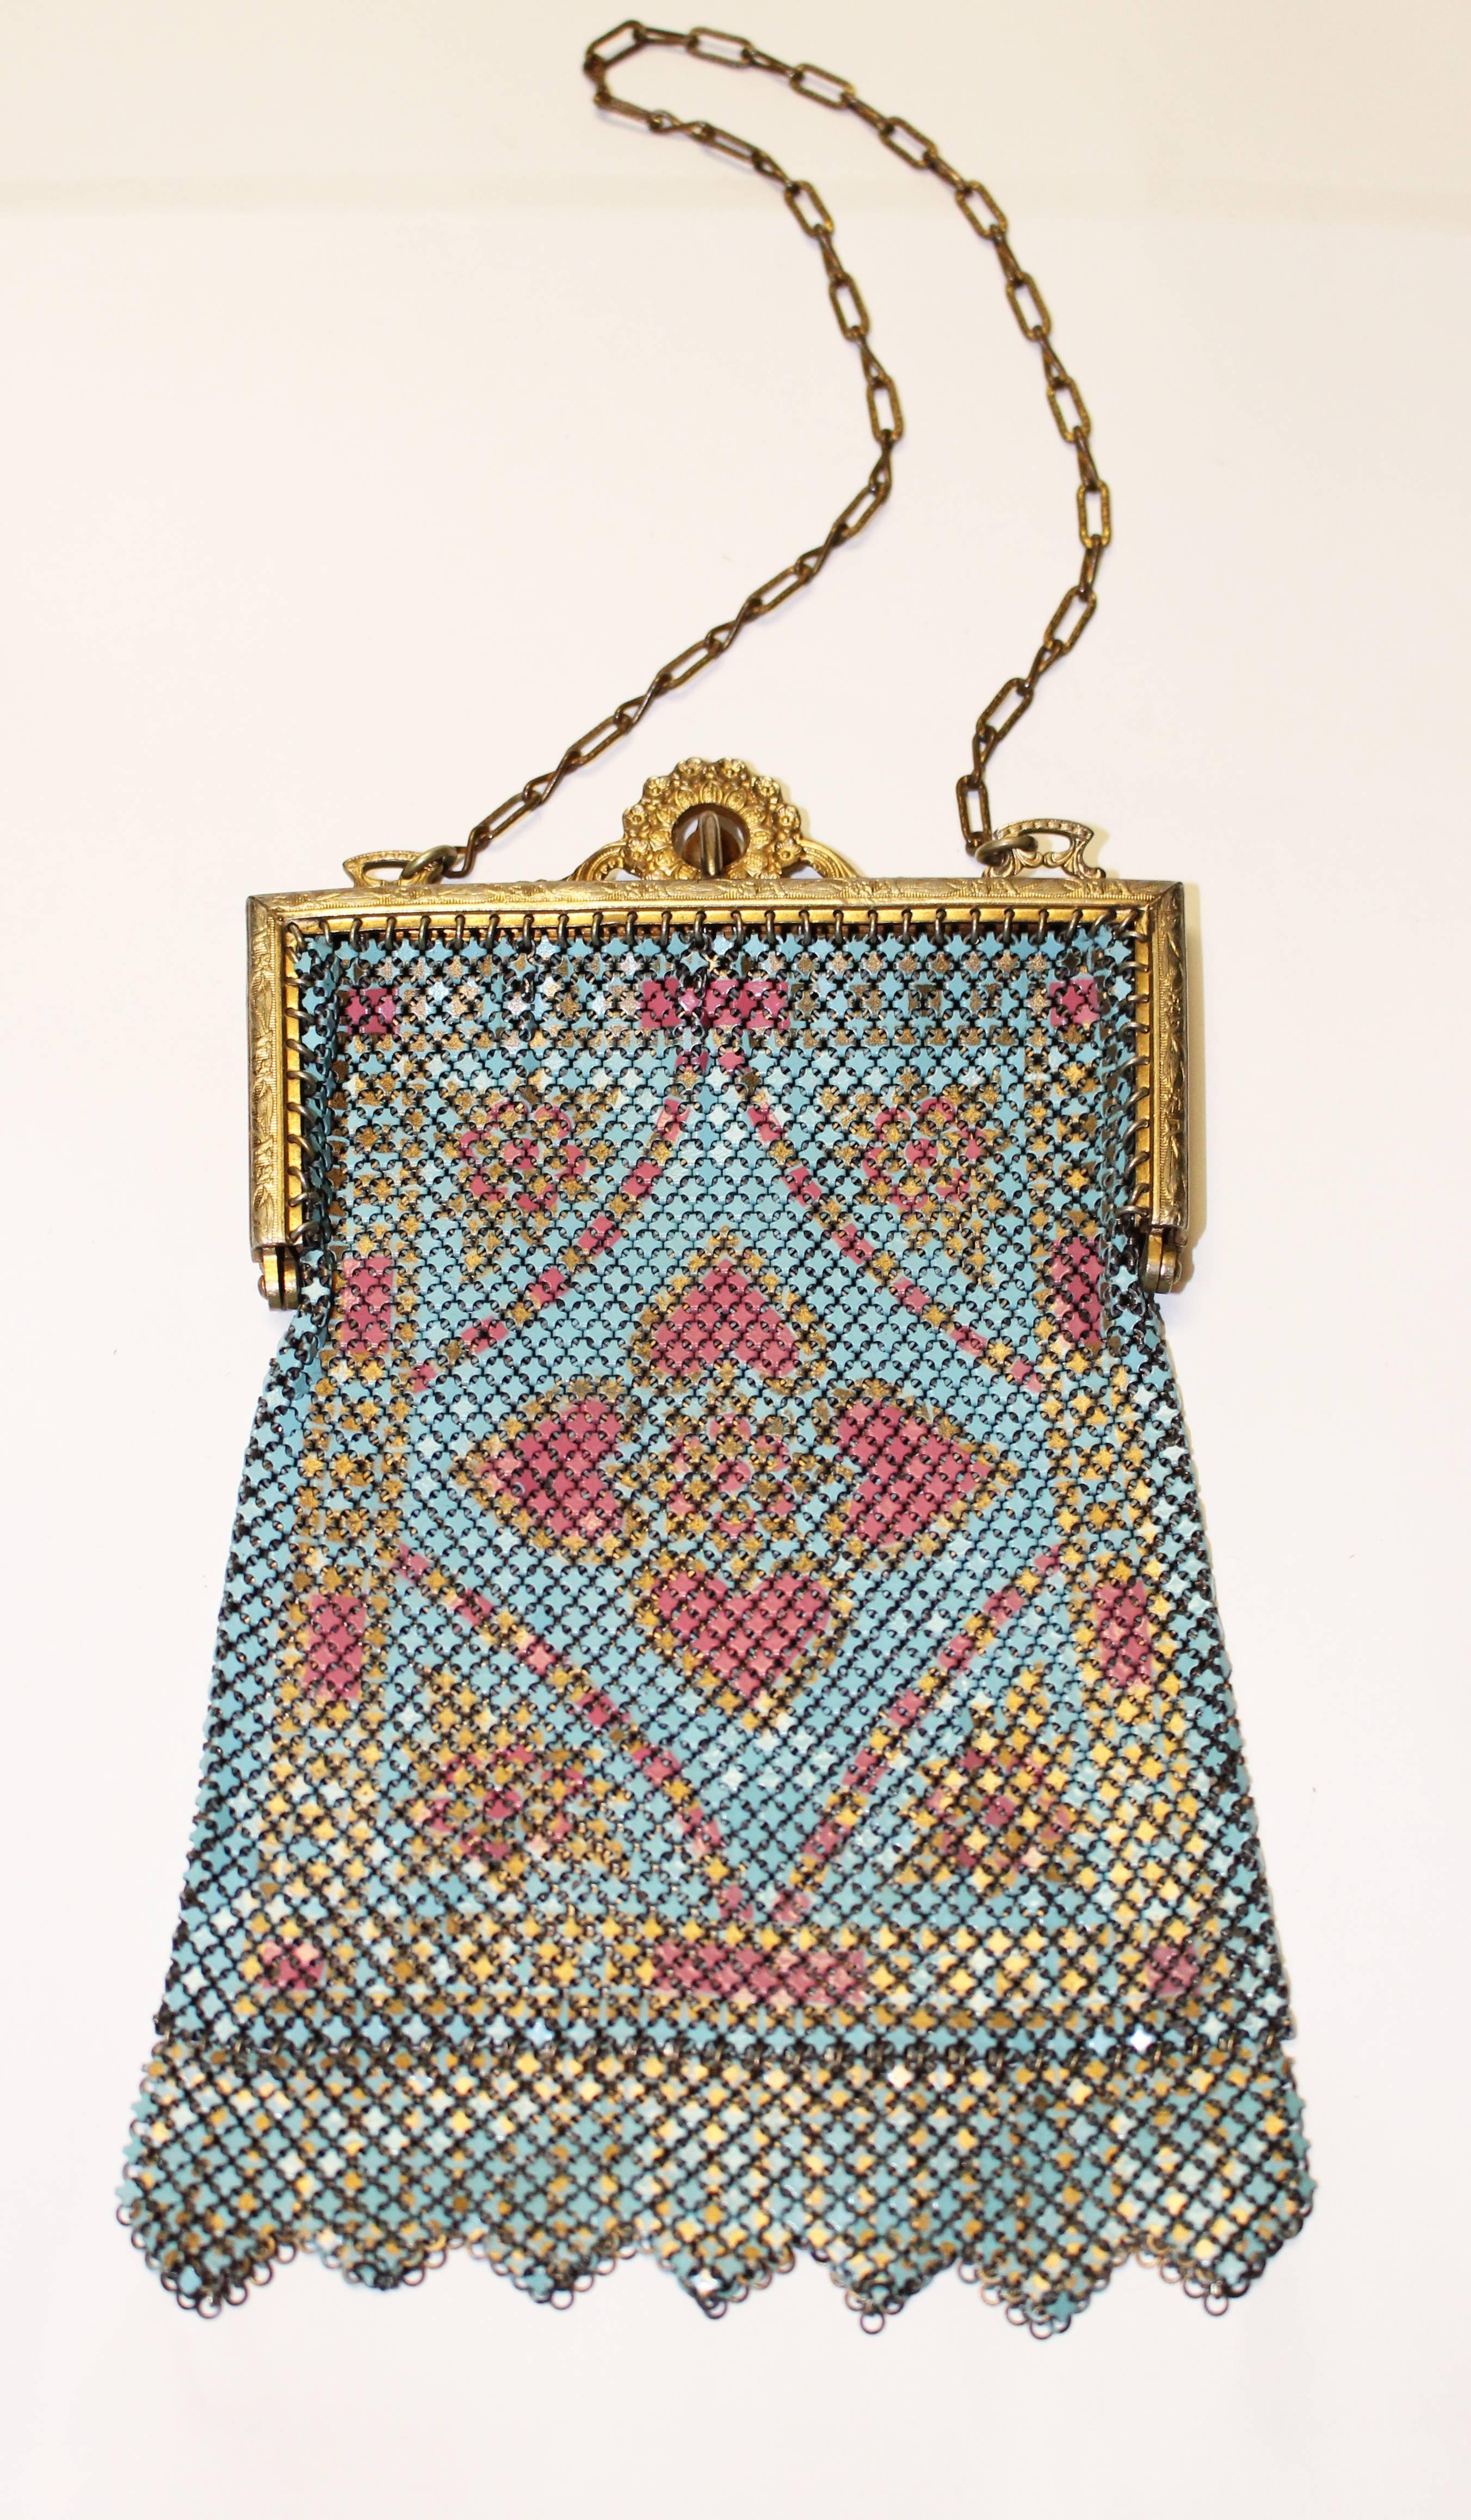 1920's painted bright blue and pink mesh purse with floral design. Zigzag mesh panel fringe and ornate gold tone frame. Elegant metal chain handle.

Measurements:
Handle: 12" long
Length: 6" long including mesh fringe
Width: 4"